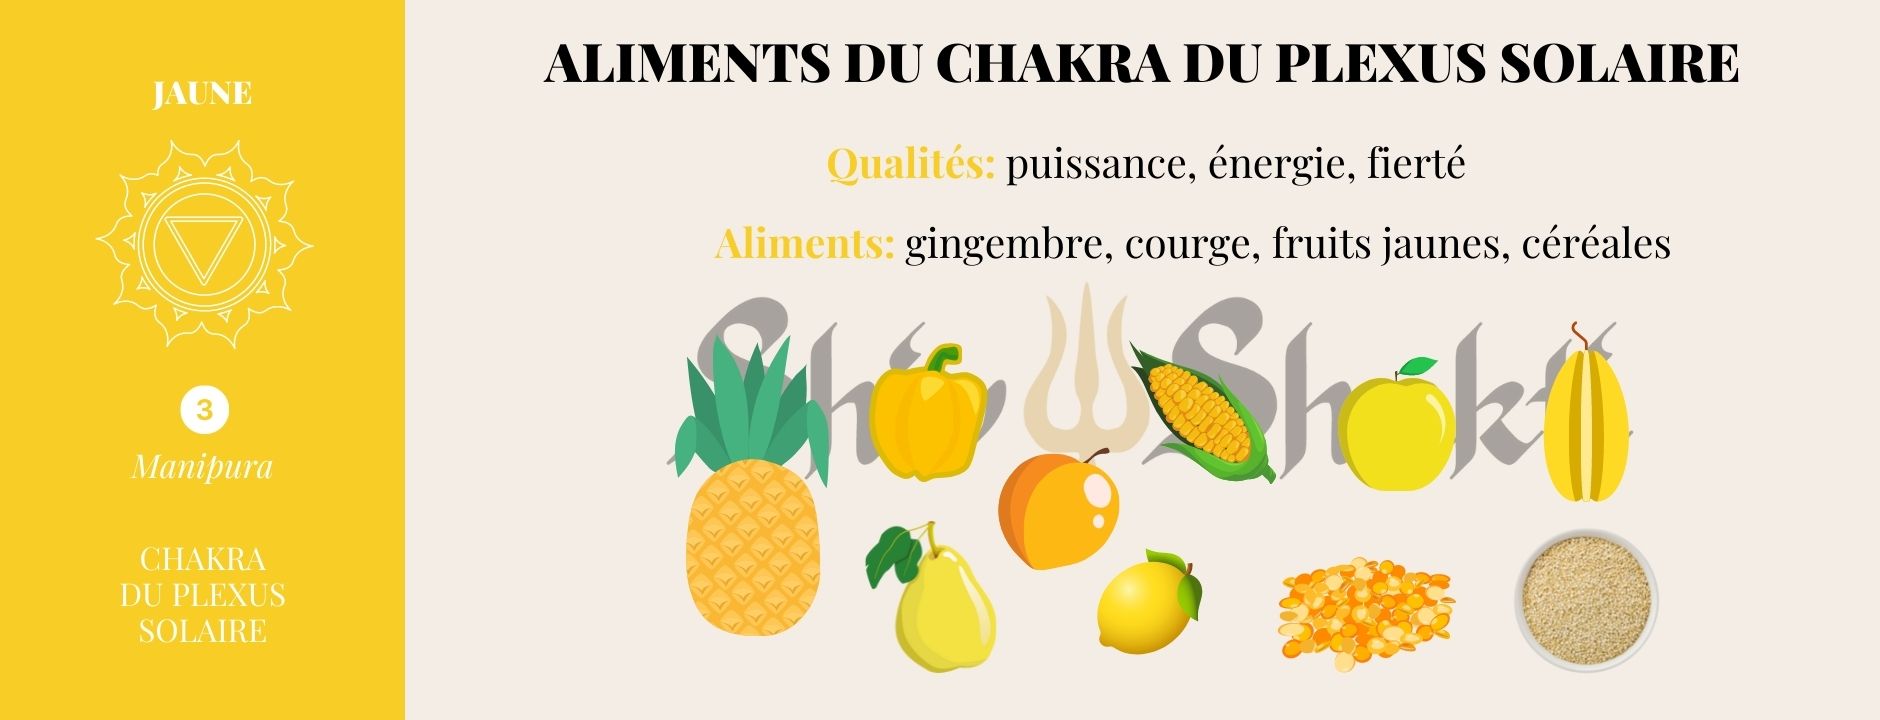 What foods are good for the solar plexus chakra?